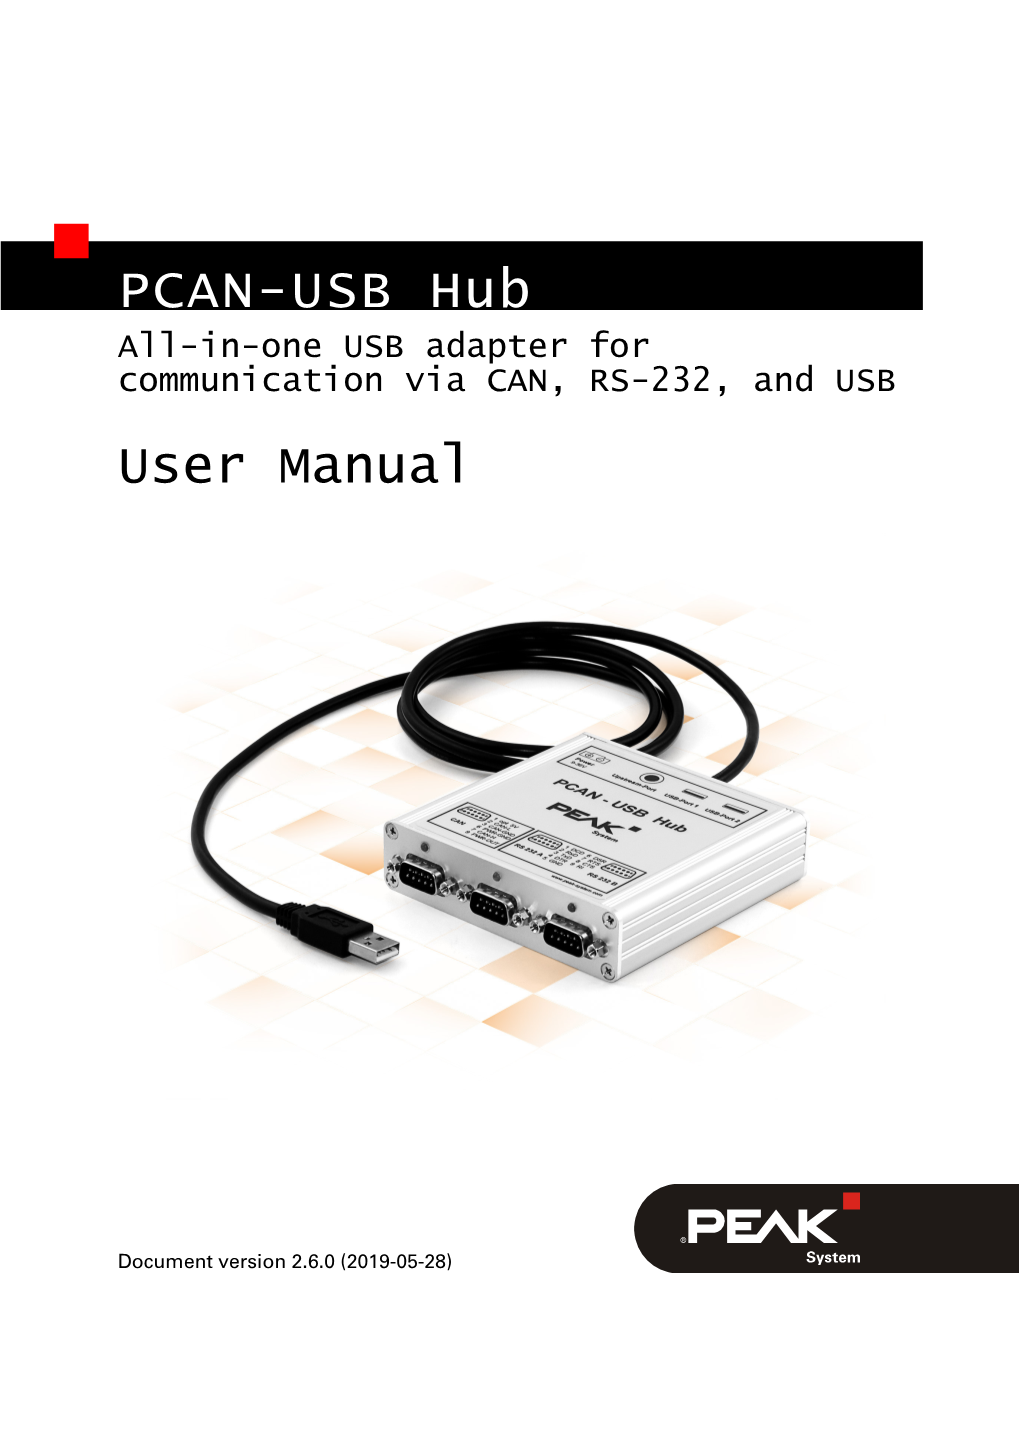 PCAN-USB Hub All-In-One USB Adapter for Communication Via CAN, RS-232, and USB User Manual